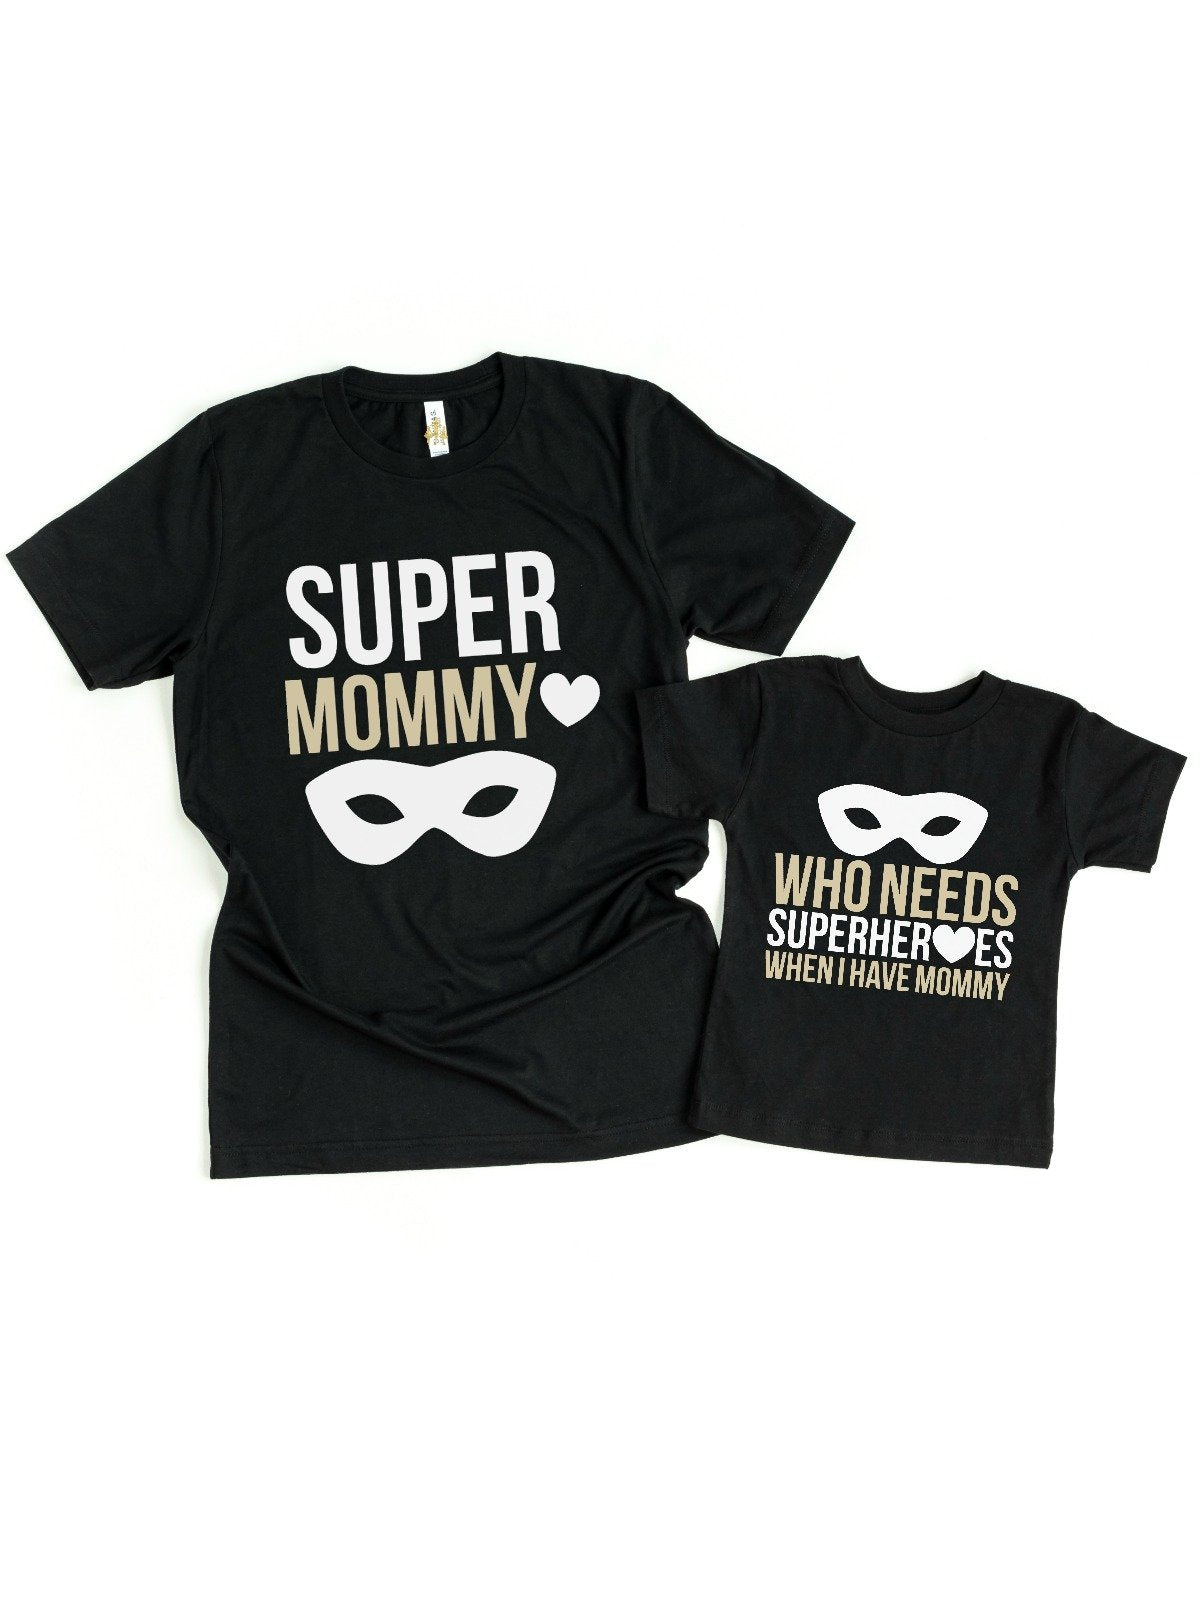 mother and son matching super heroes shirts